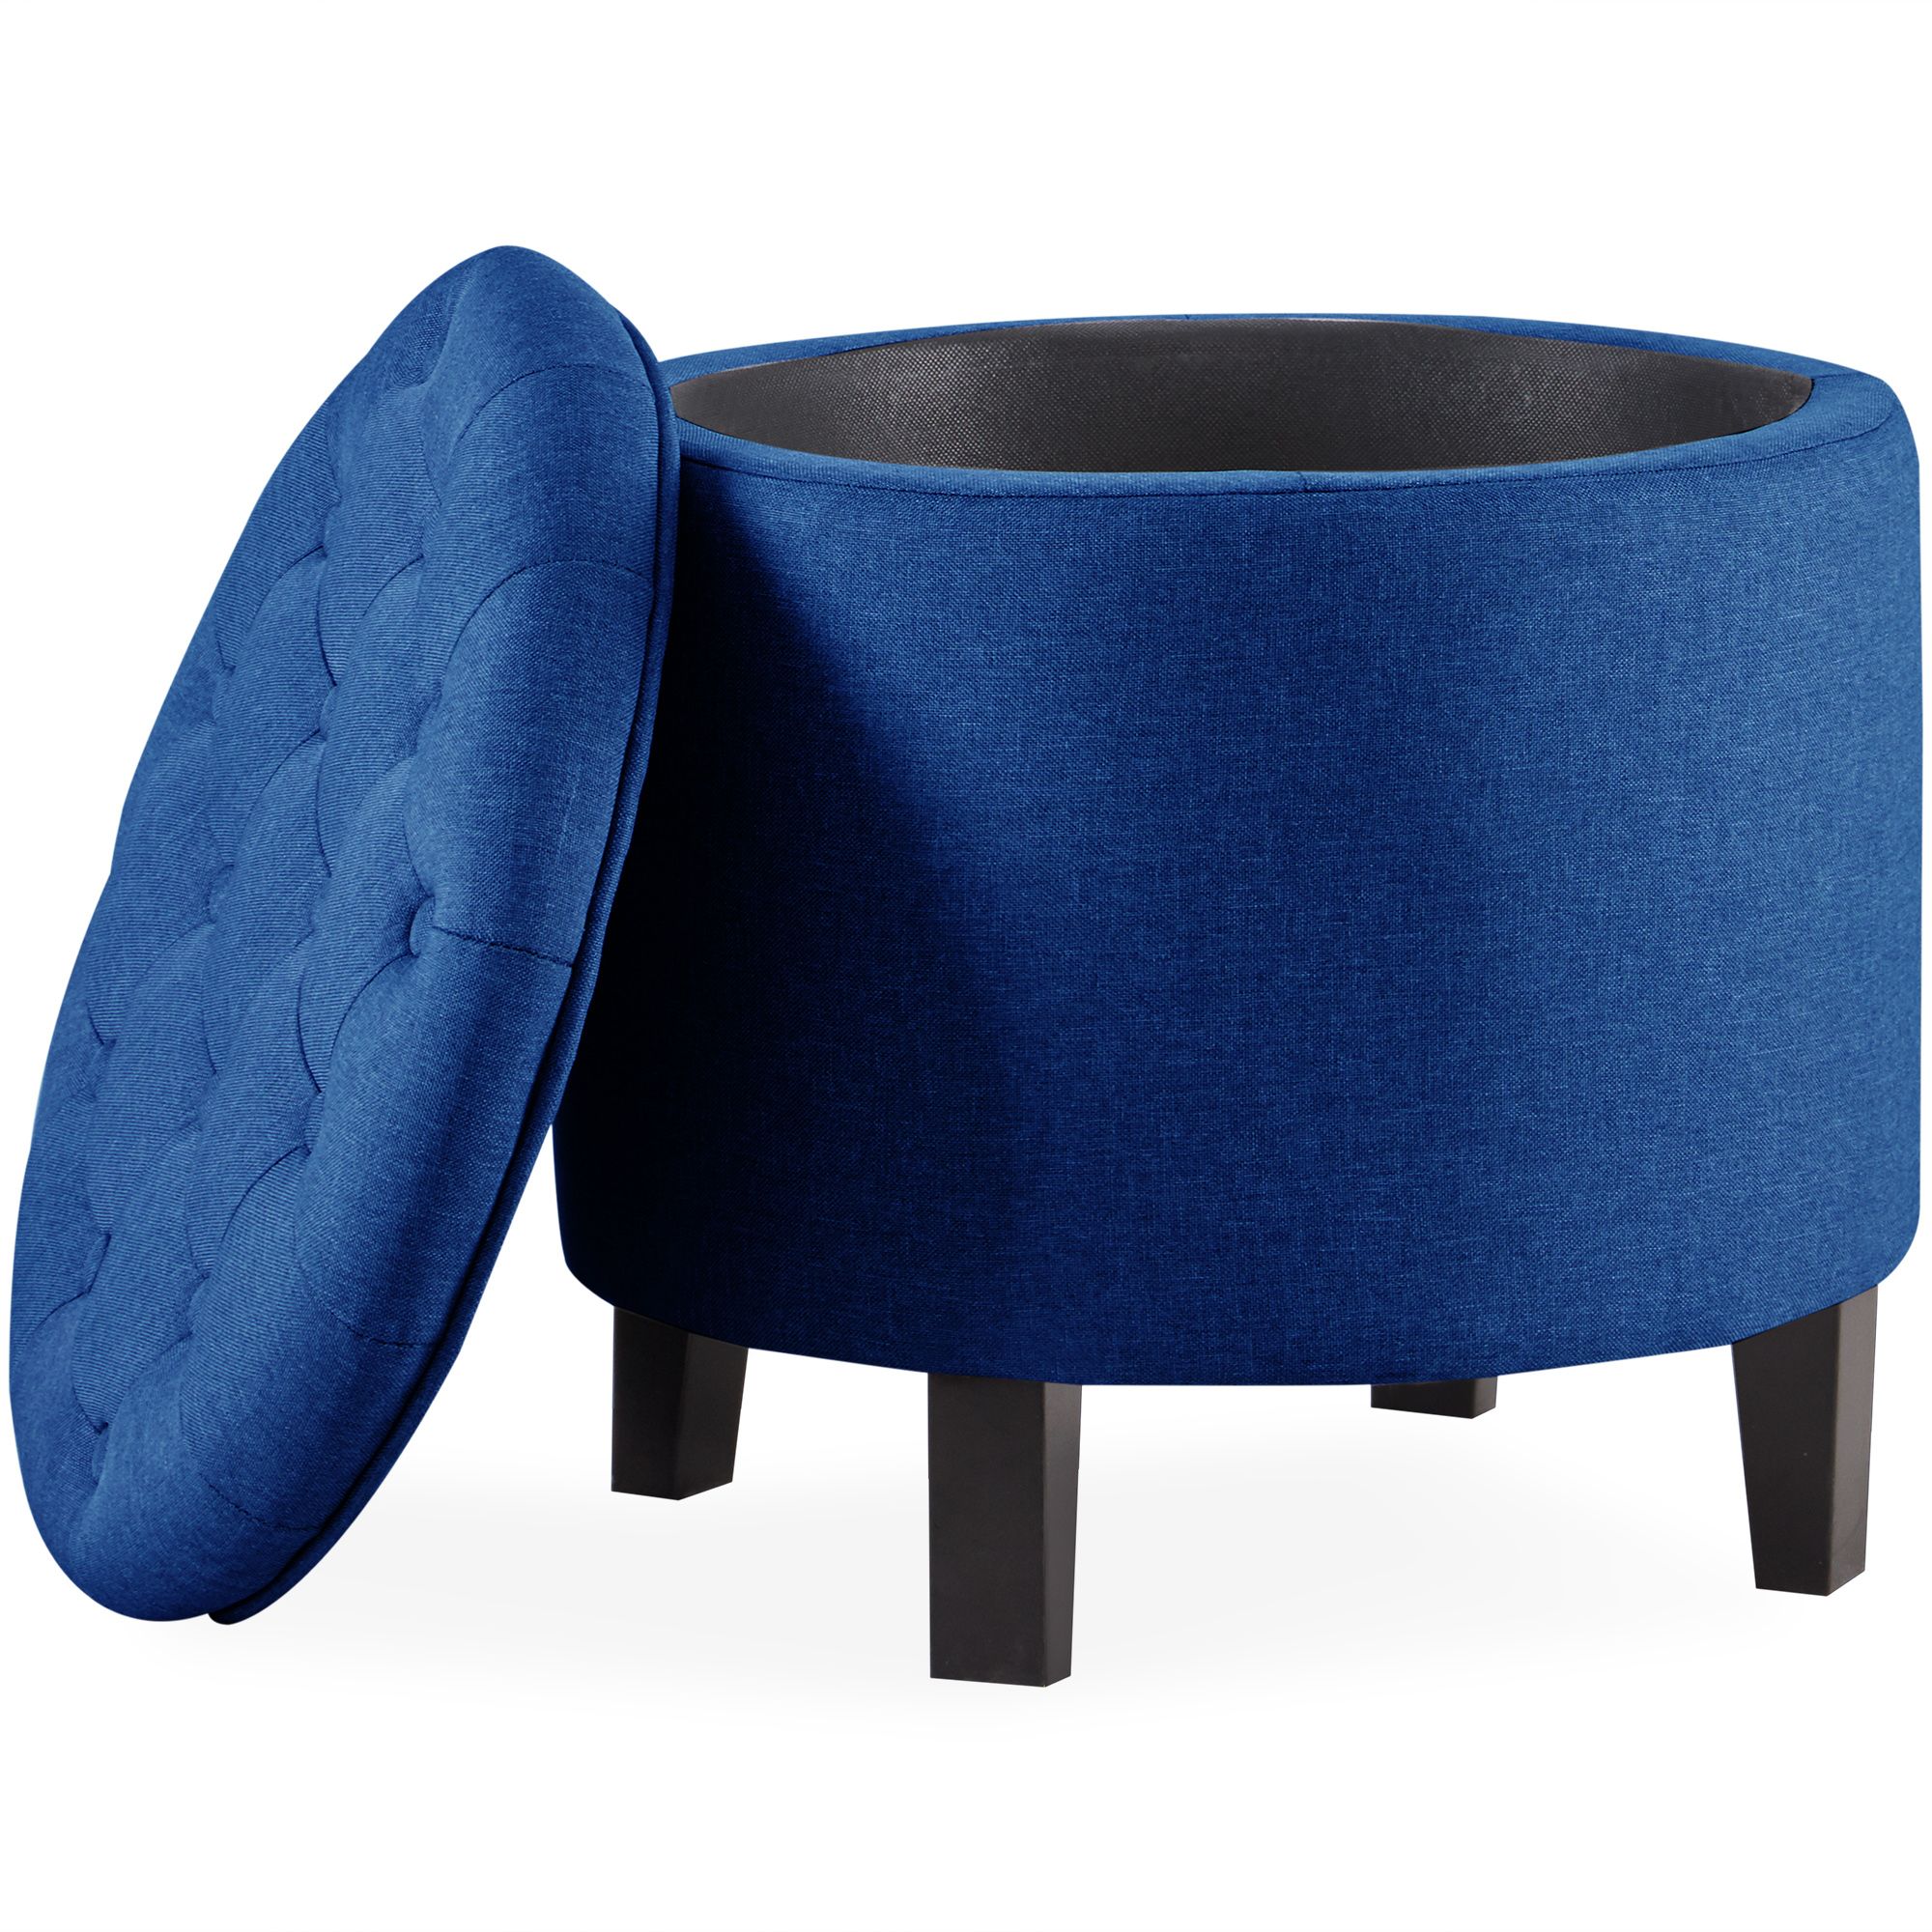 Elegant Fabric Tufted Button Ottoman Round Footstool Coffee Table, Blue Within Blue Fabric Tufted Surfboard Ottomans (View 2 of 20)